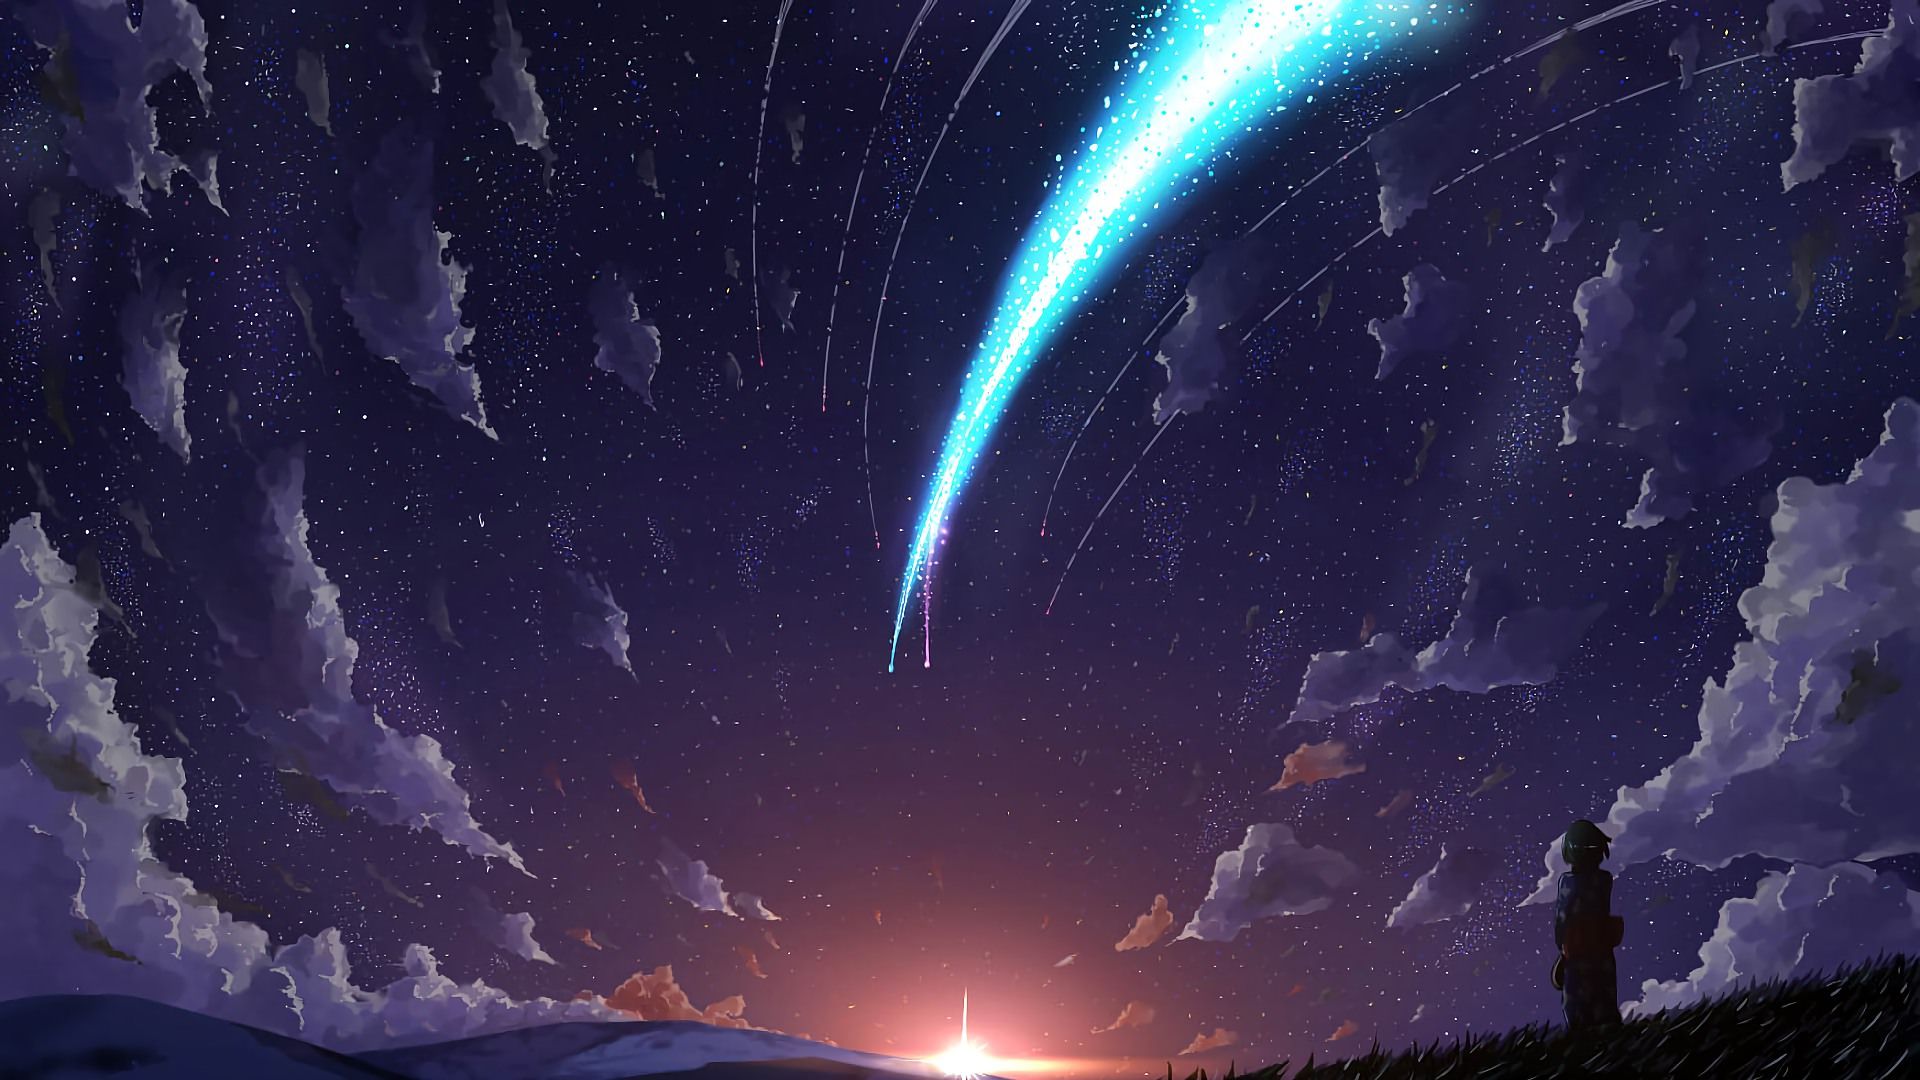 Your Name Anime Landscape Wallpapers